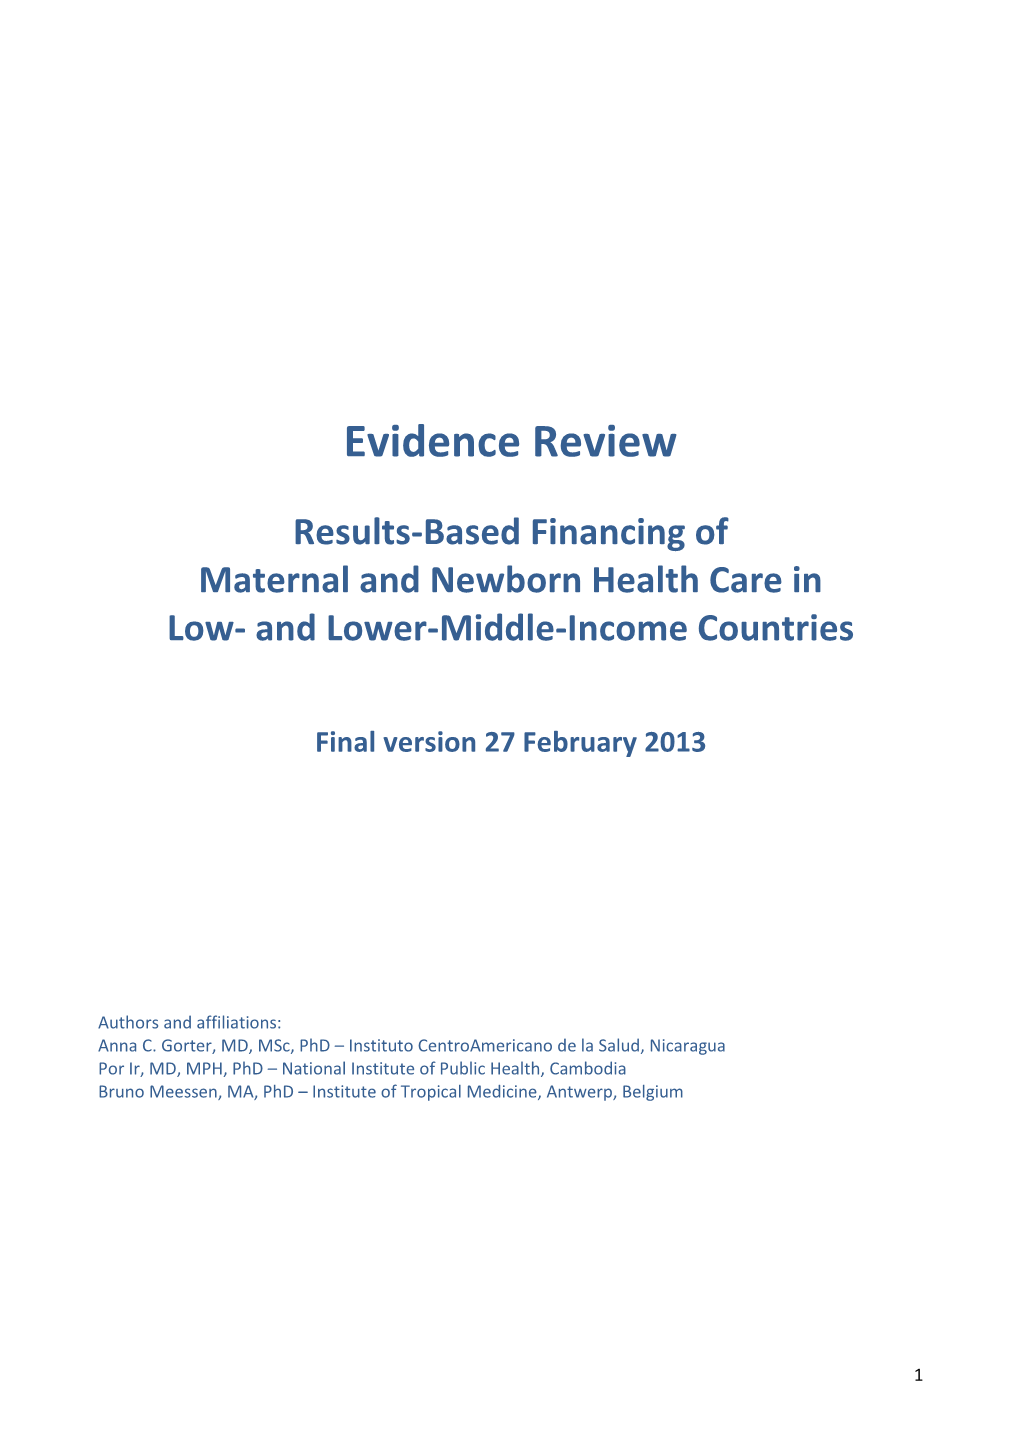 Evidence Review: Results-Based Financing of Maternal And